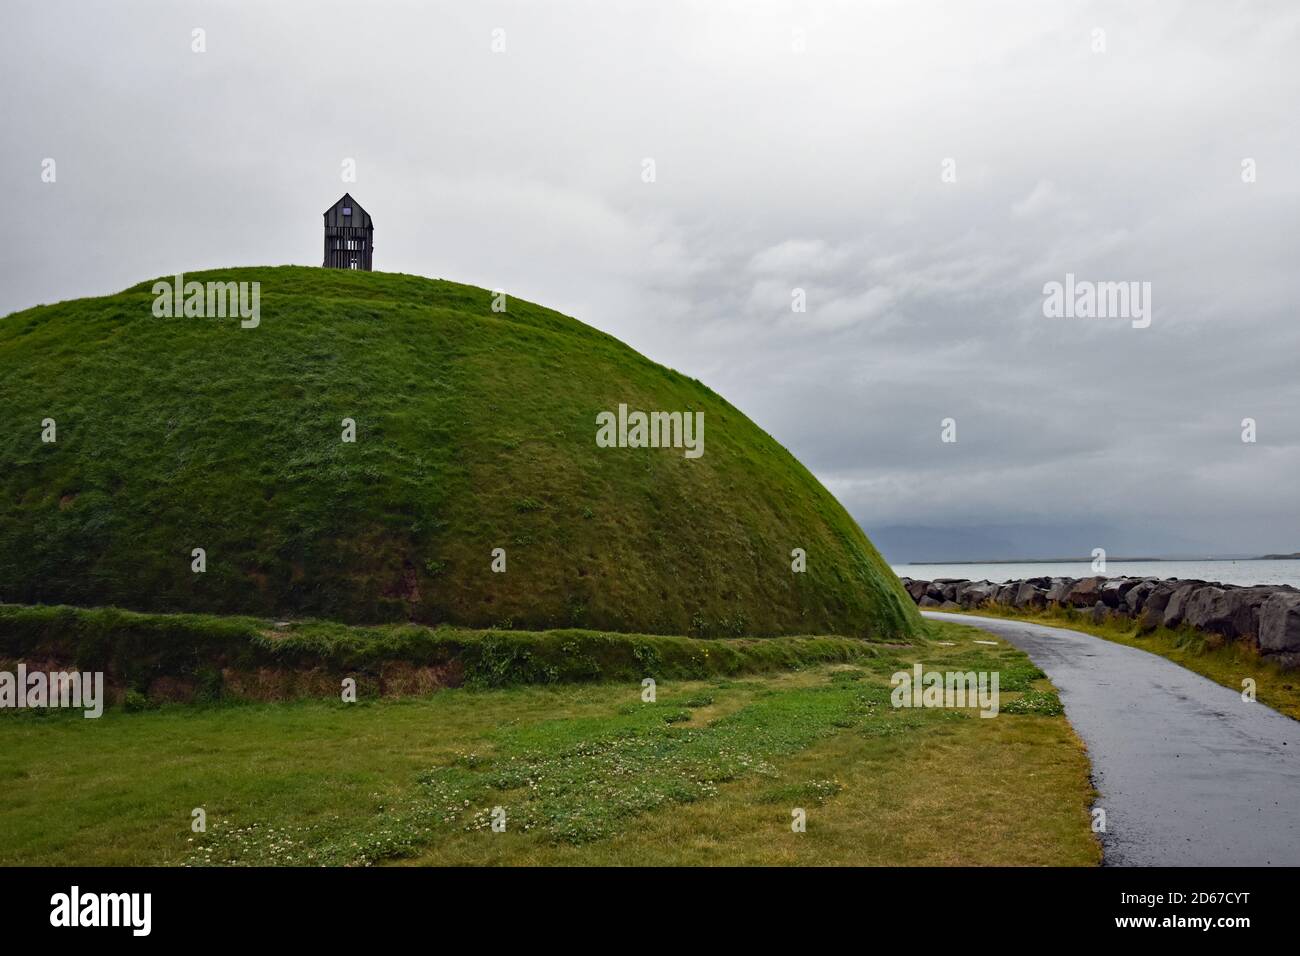 Thufa (Þúfa) by Ólöf Nordal at the entrance to Reykjavik Harbour, Iceland.  A grassy hill with a spiral path leading to a wooden fishing shed on top. Stock Photo